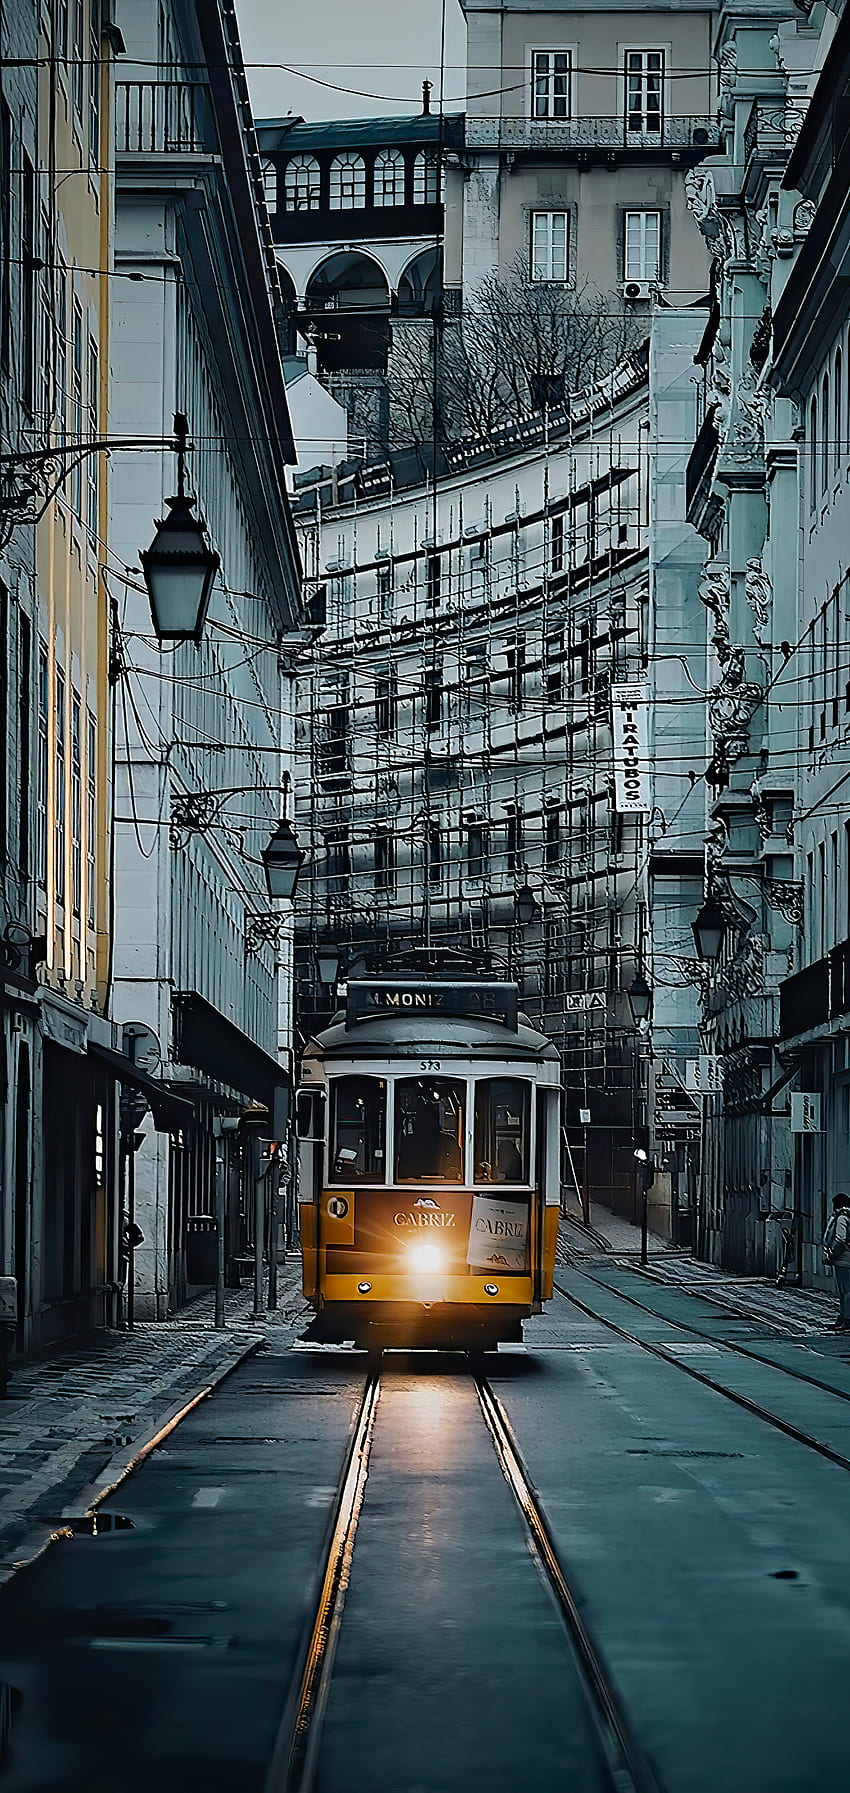 Check out these streetcar for your iPhone, Old Street HD phone wallpaper